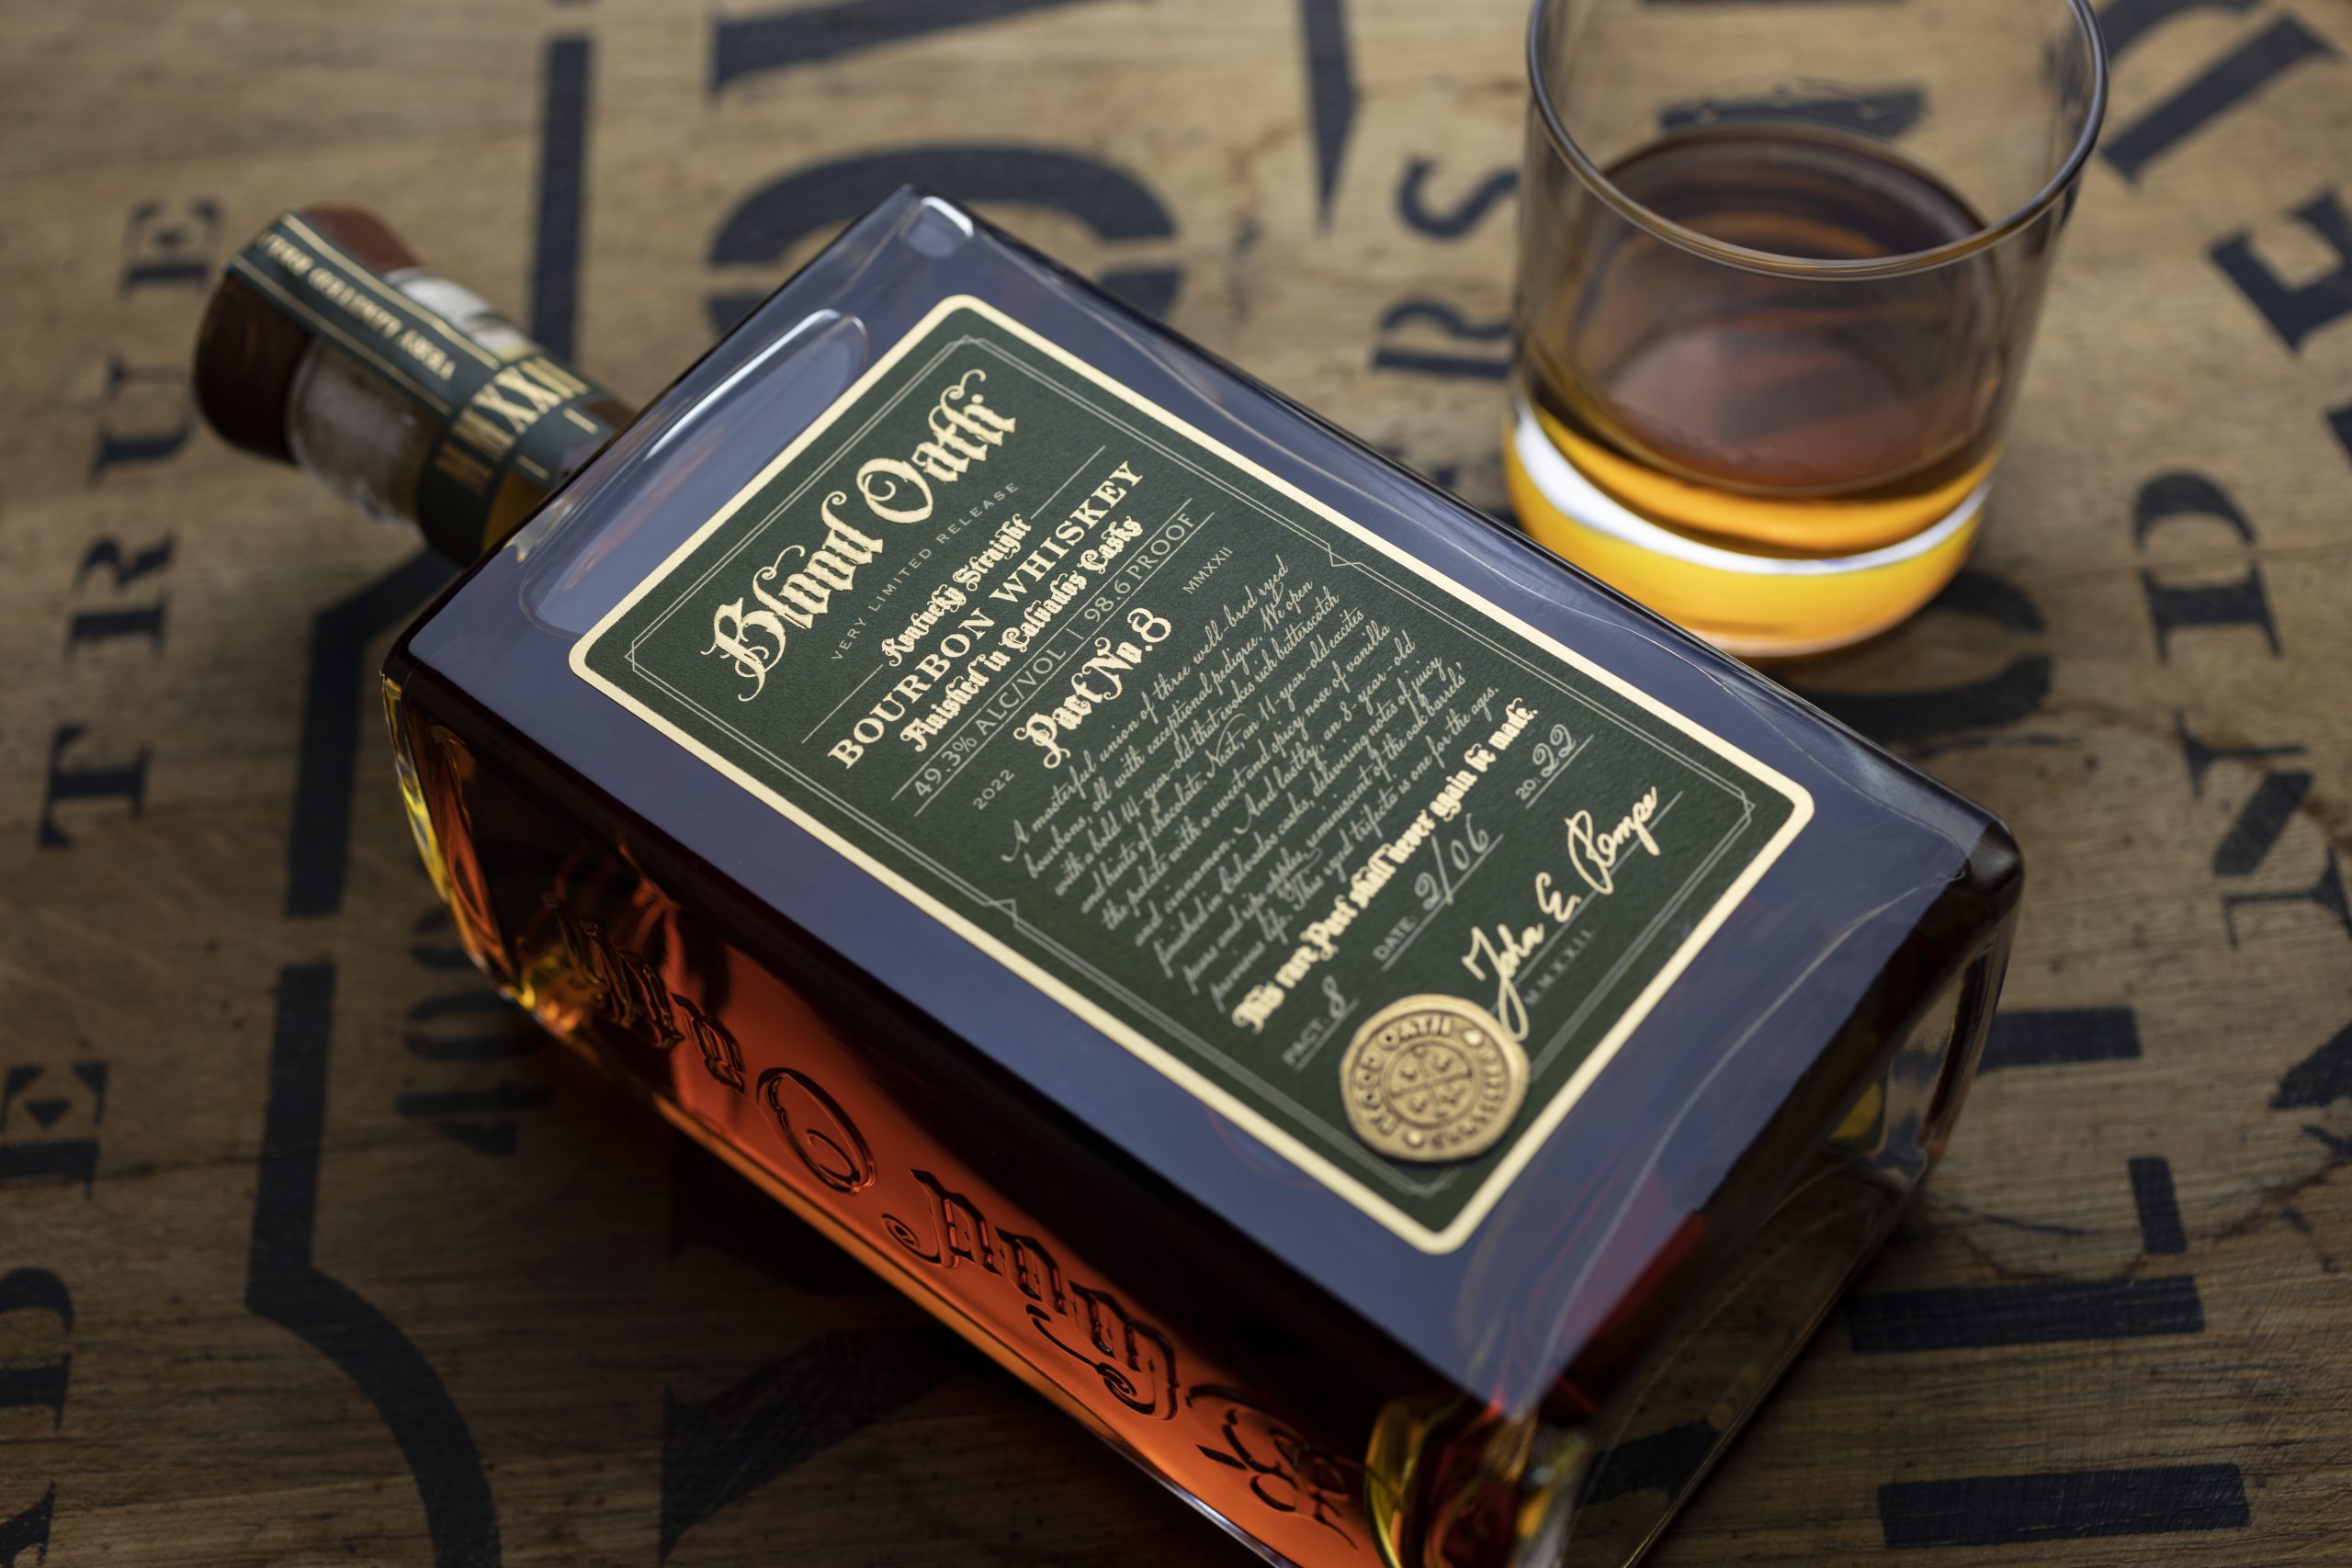 2022 Release: Blood Oath Pact No. 8 - Lux Row Distillers